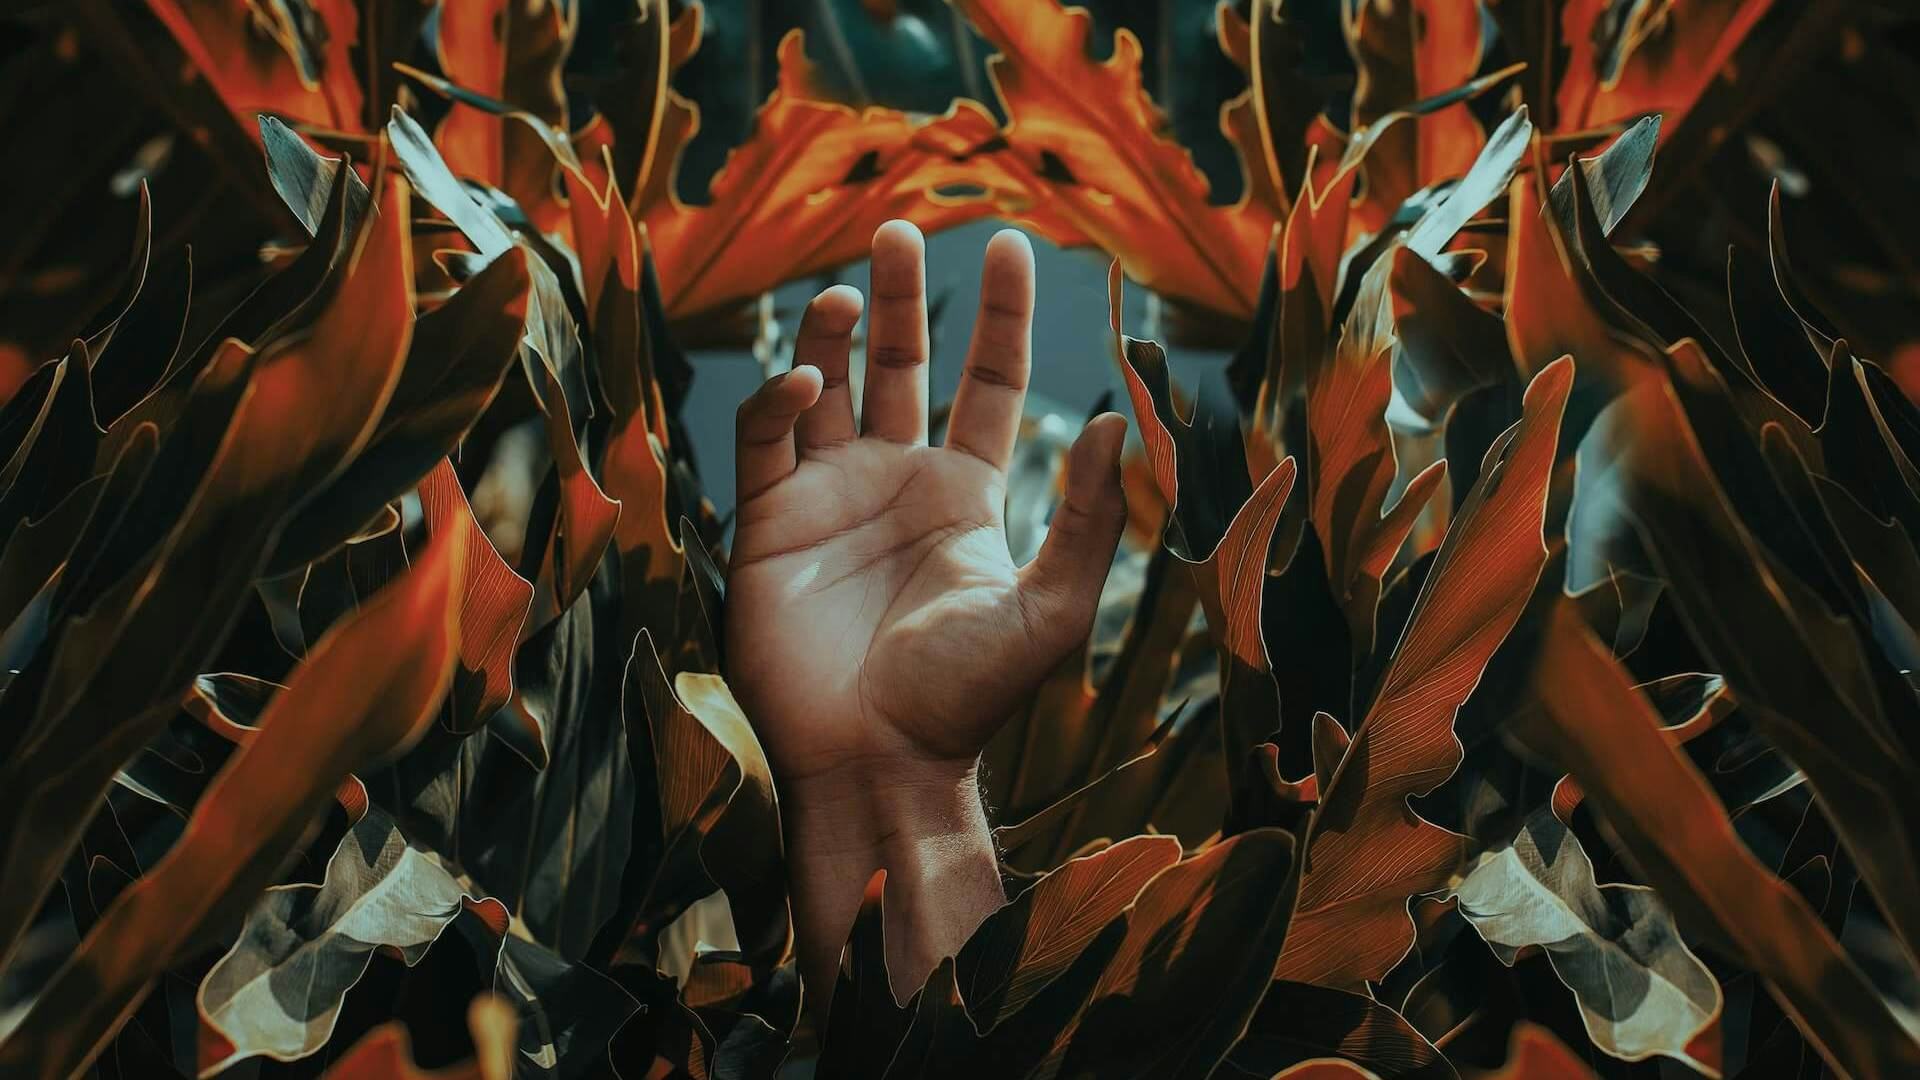 Extending hand of a person in the middle of orange flowers